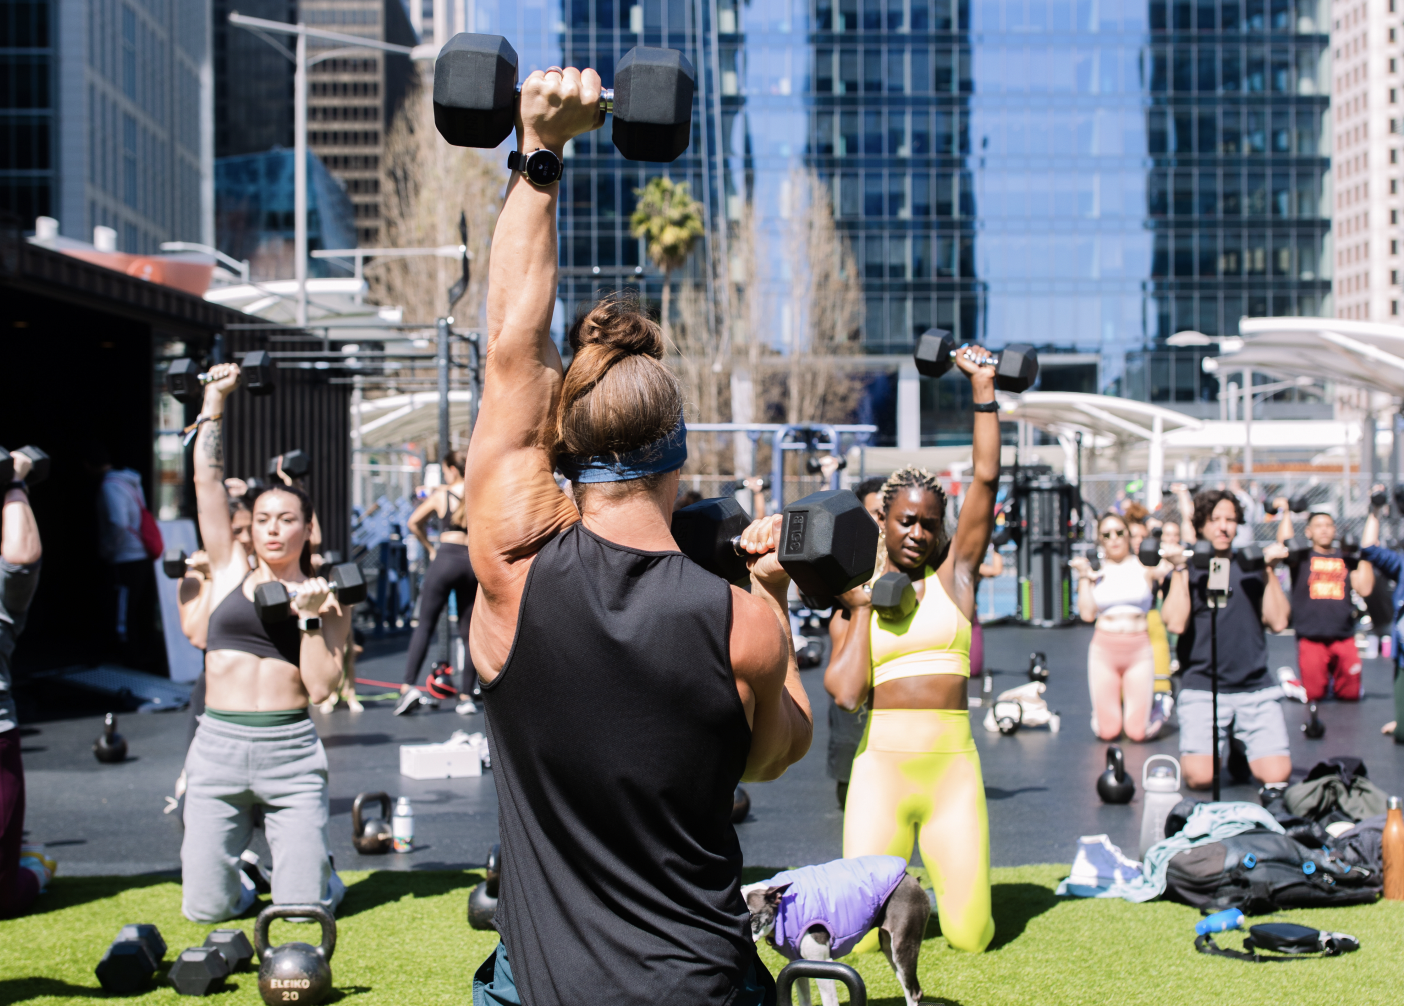 Yotam Israeli is bringing fitness outdoors with LuxFit — SHACK15